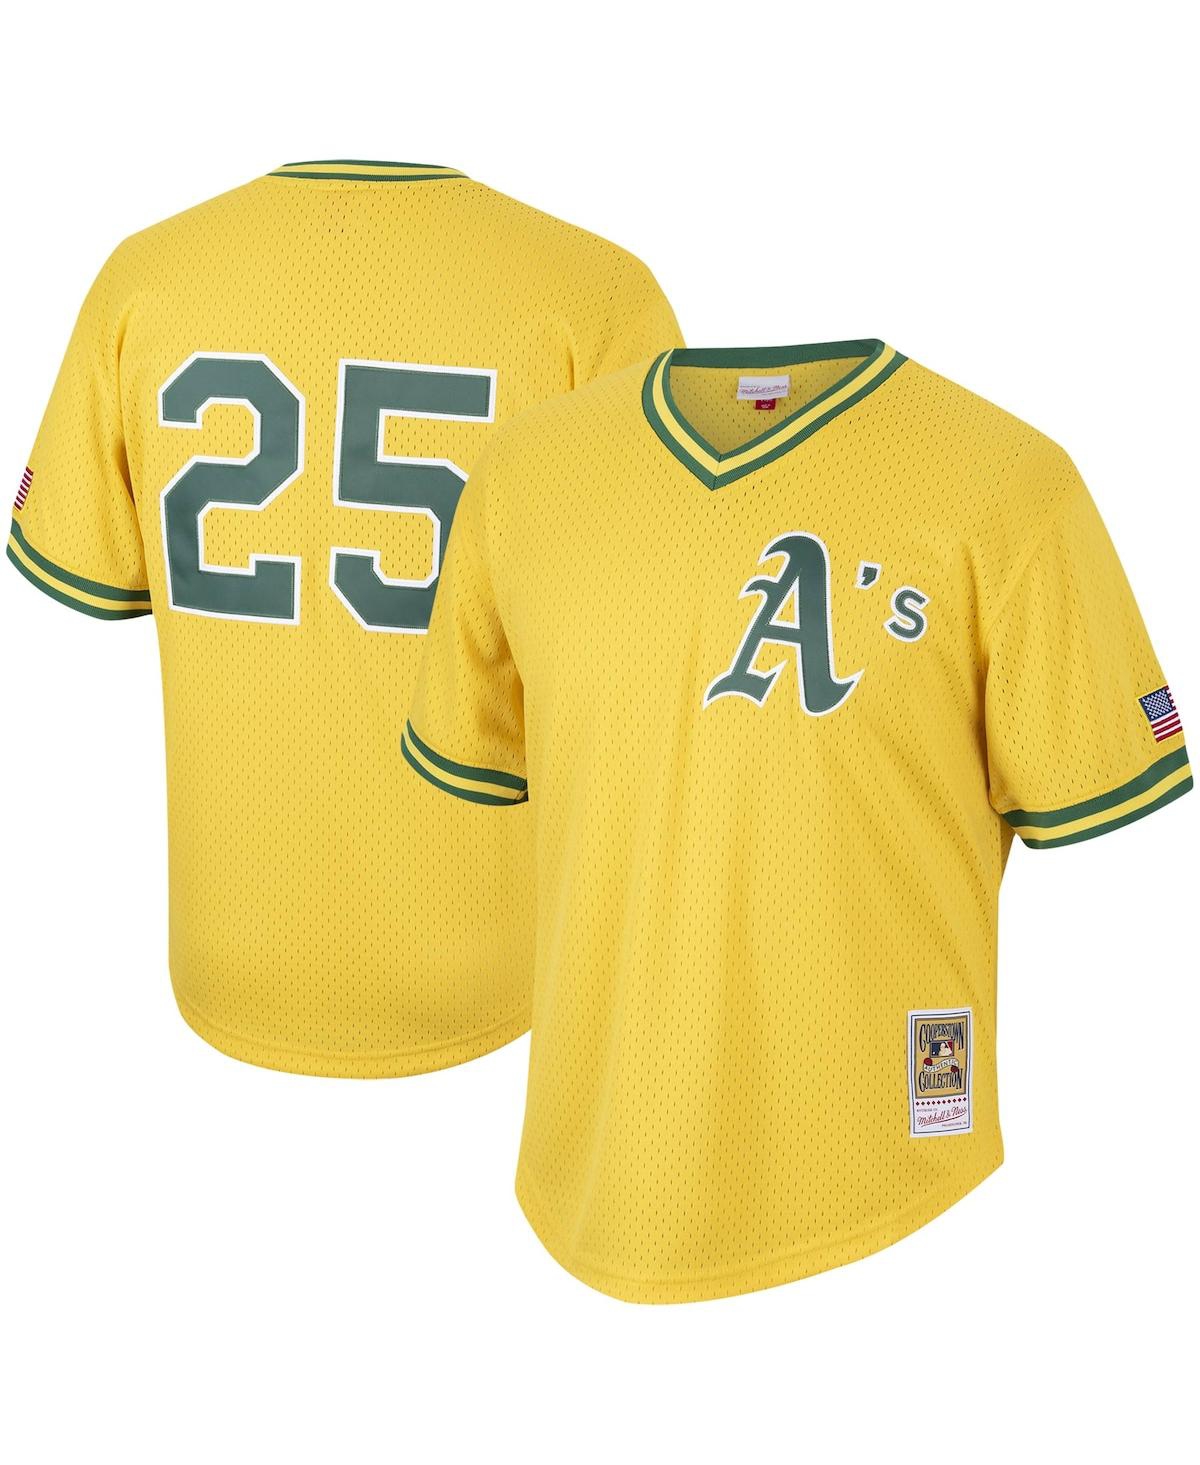 Men's Mitchell & Ness Mark McGwire Gold Oakland Athletics Cooperstown Collection Mesh Batting Practice Jersey - Gold